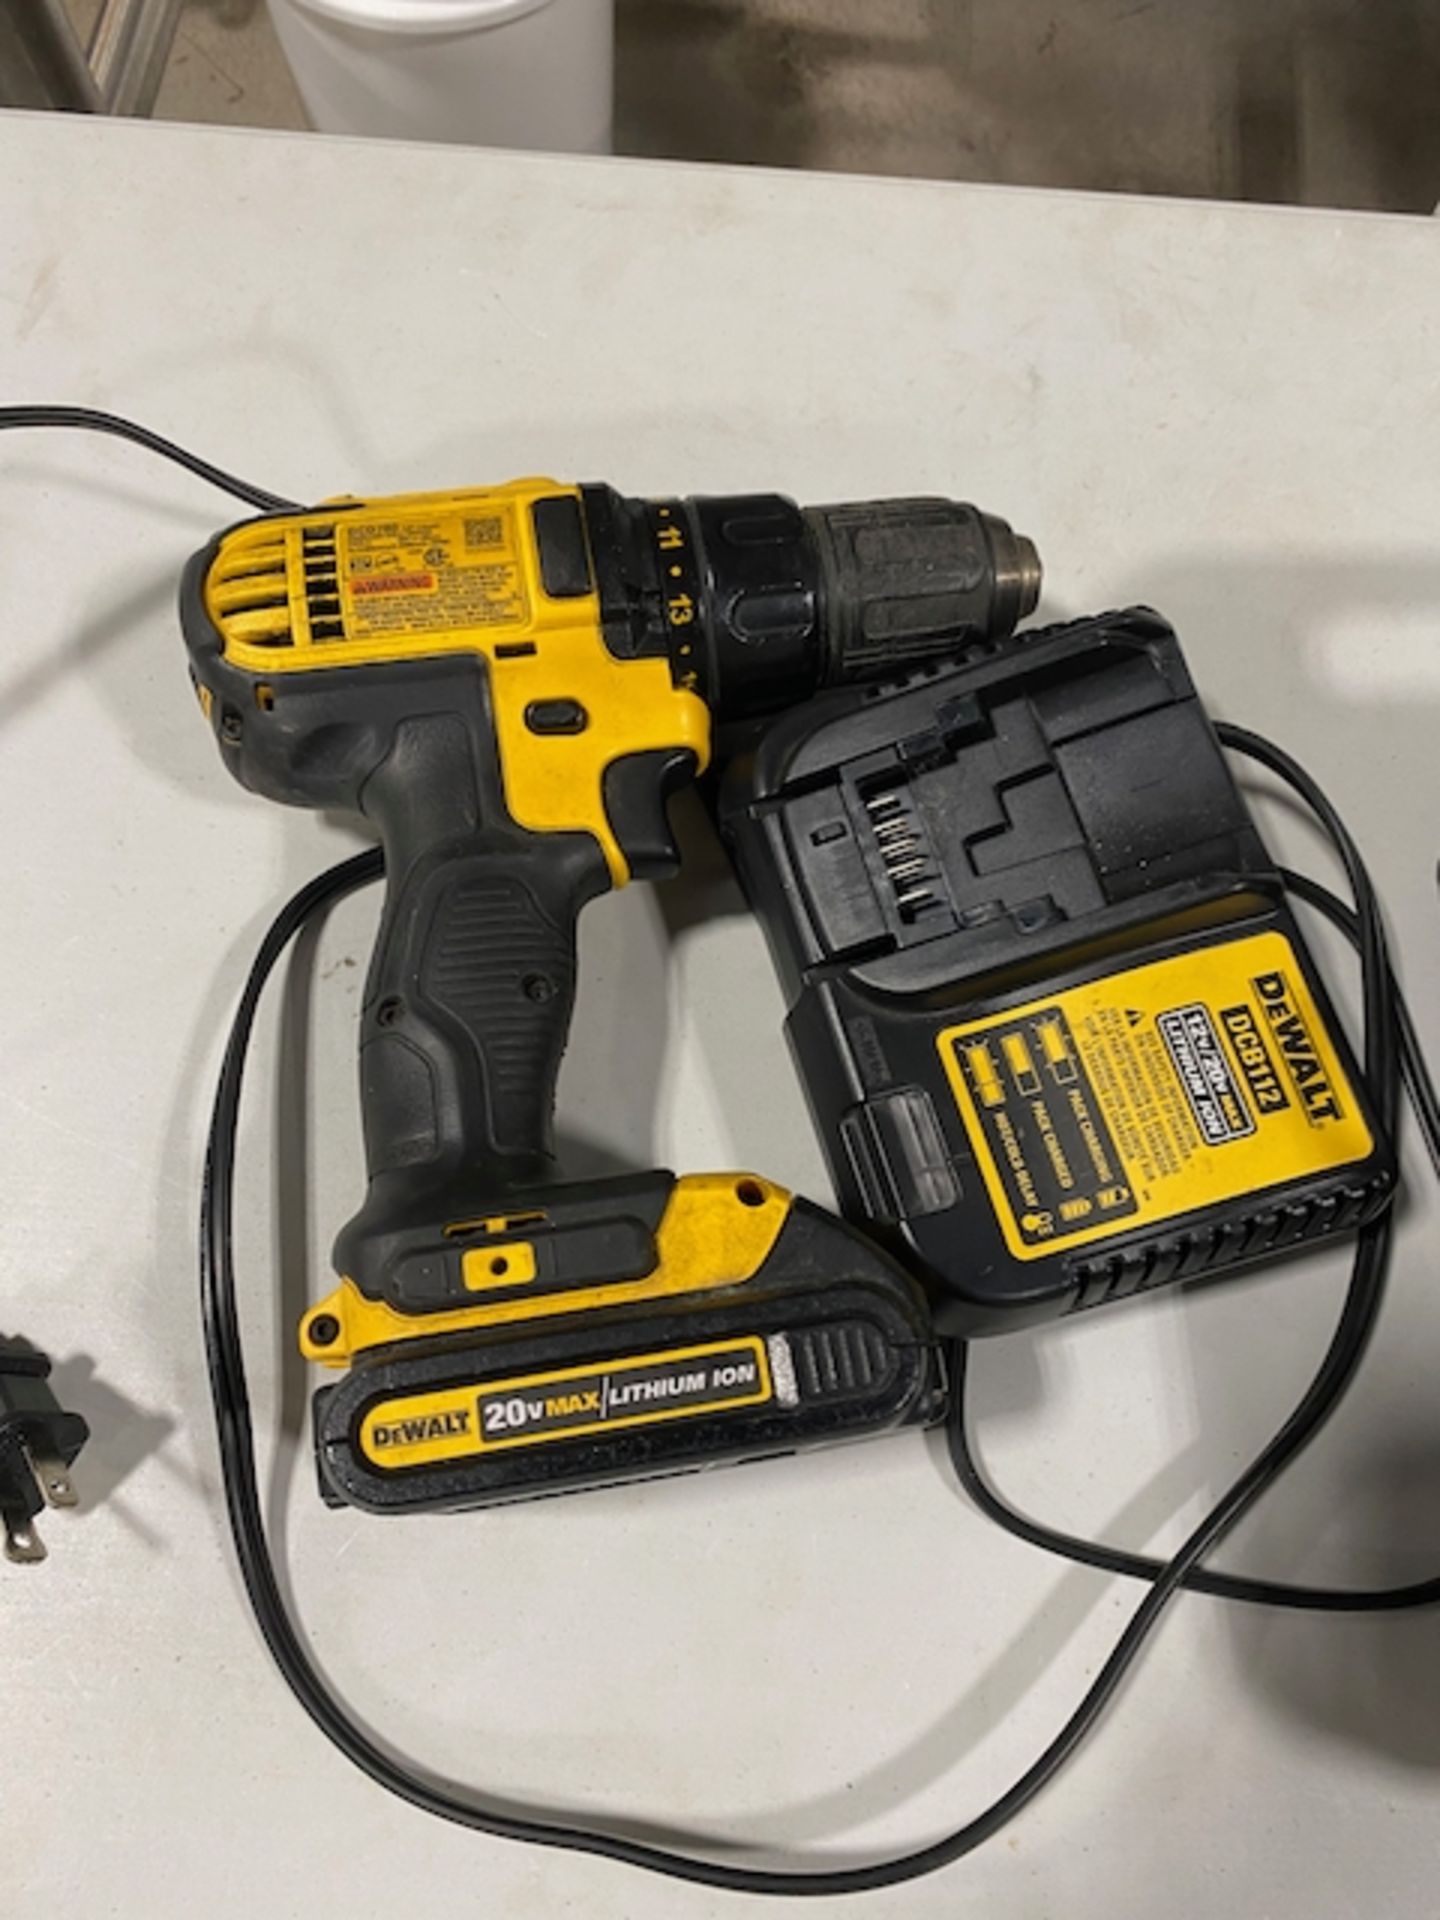 Dewalt 20V Cordless Drill with Battery and Charger | Rig Fee $25